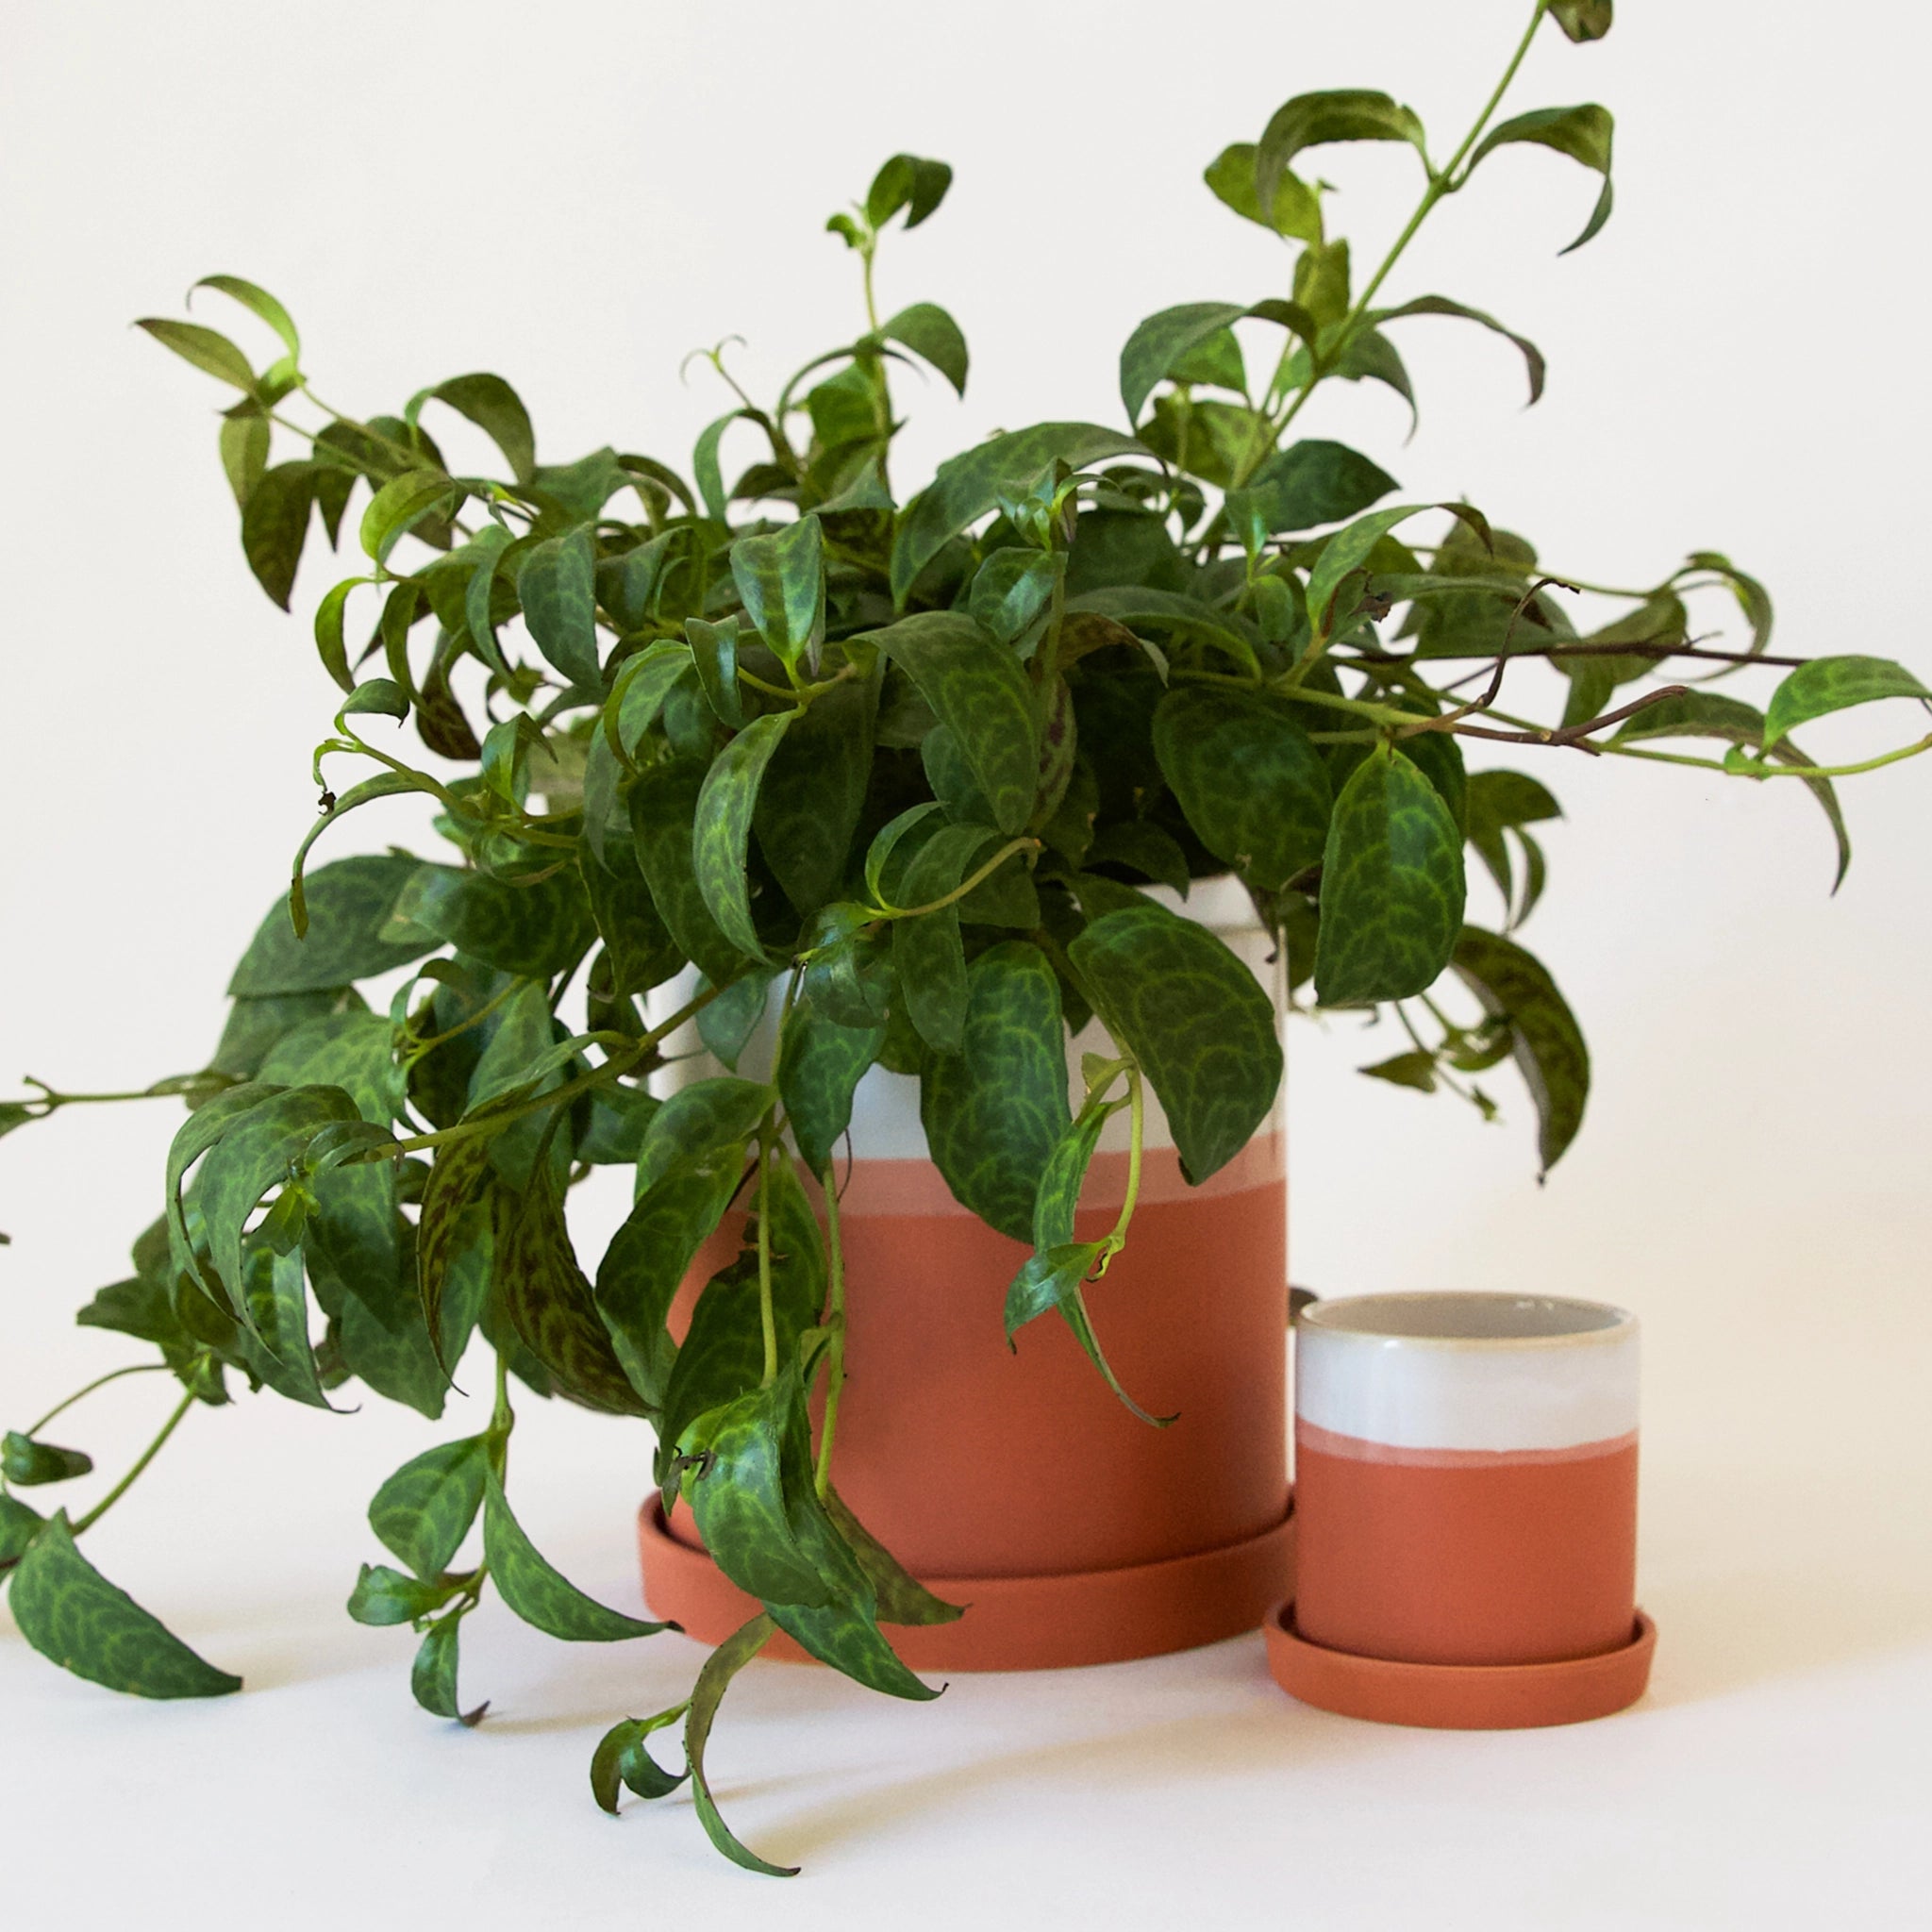 A large terracotta pot with matching saucer features a white glaze finish on the top half of the pot. it is filled with a lush green plant and sits next to an empty smaller version of the same pot.